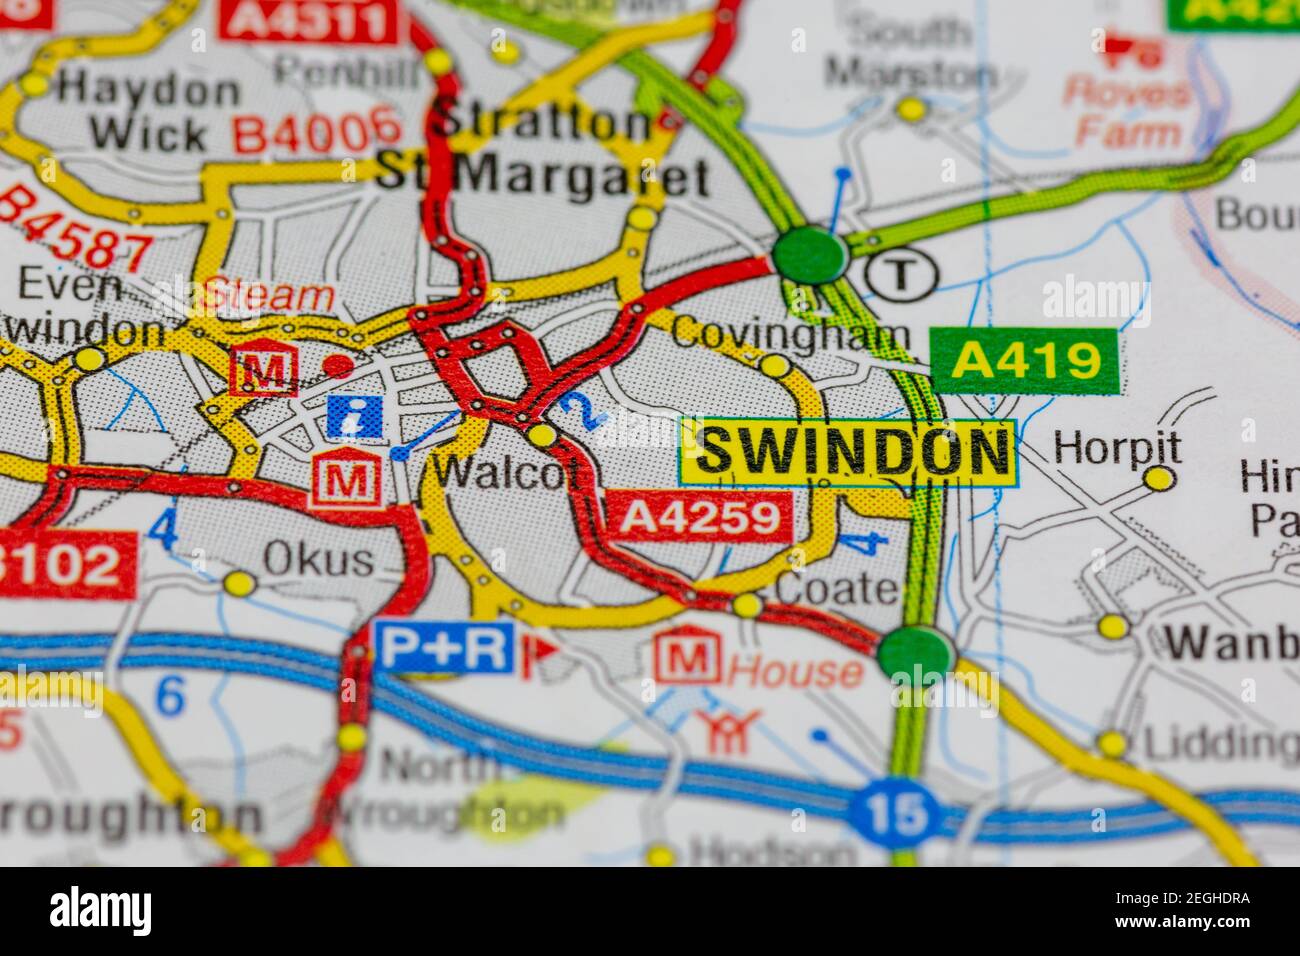 Swindon and surrounding areas shown on a road map or geography map Stock Photo